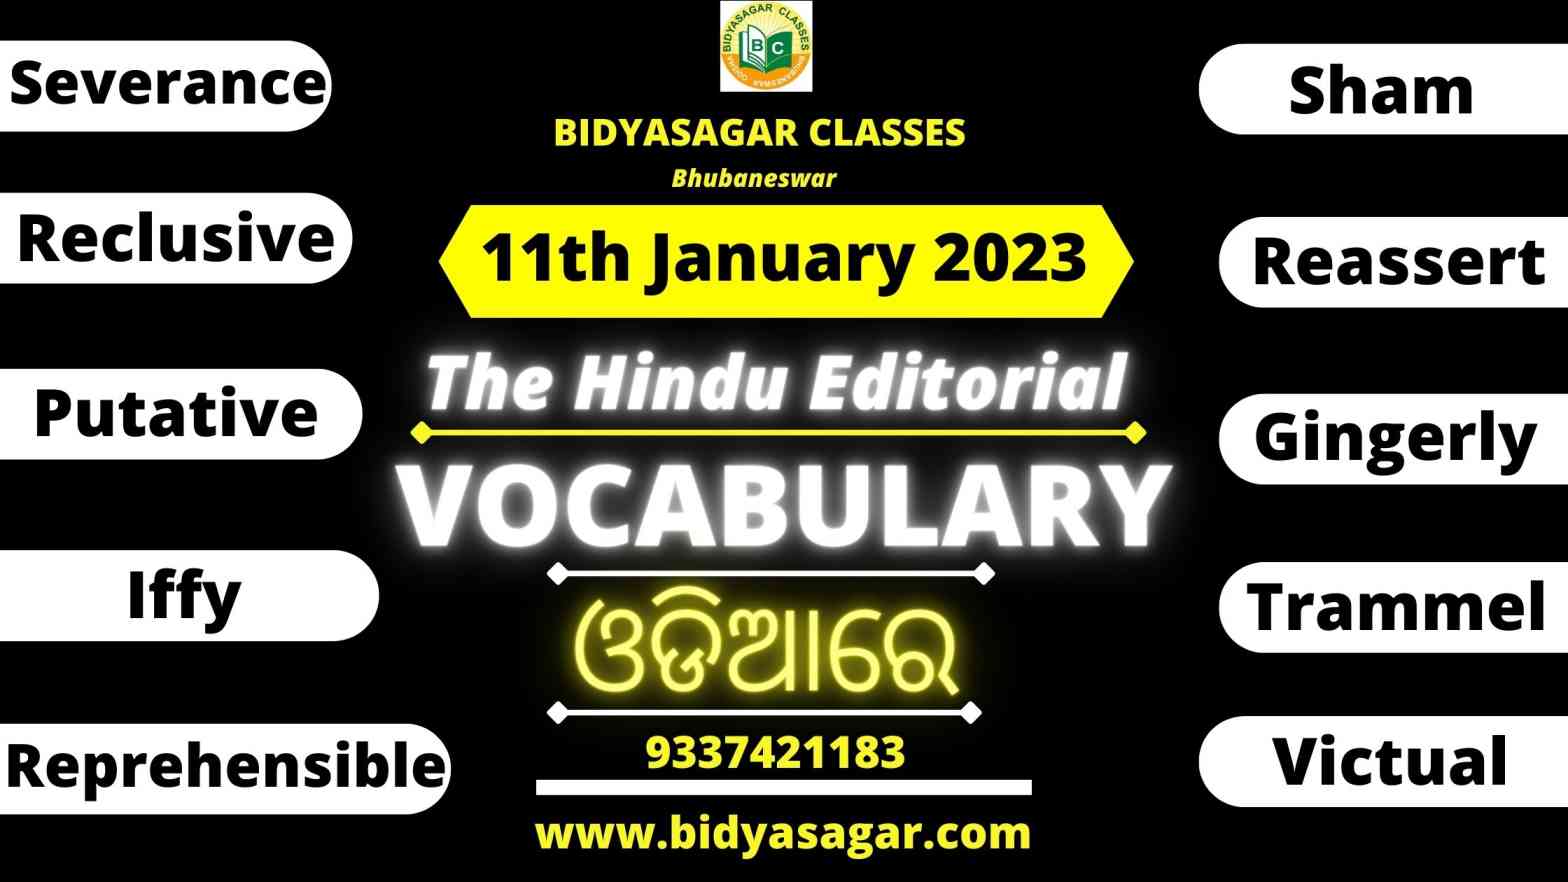 The Hindu Editorial Vocabulary of 11th January 2023